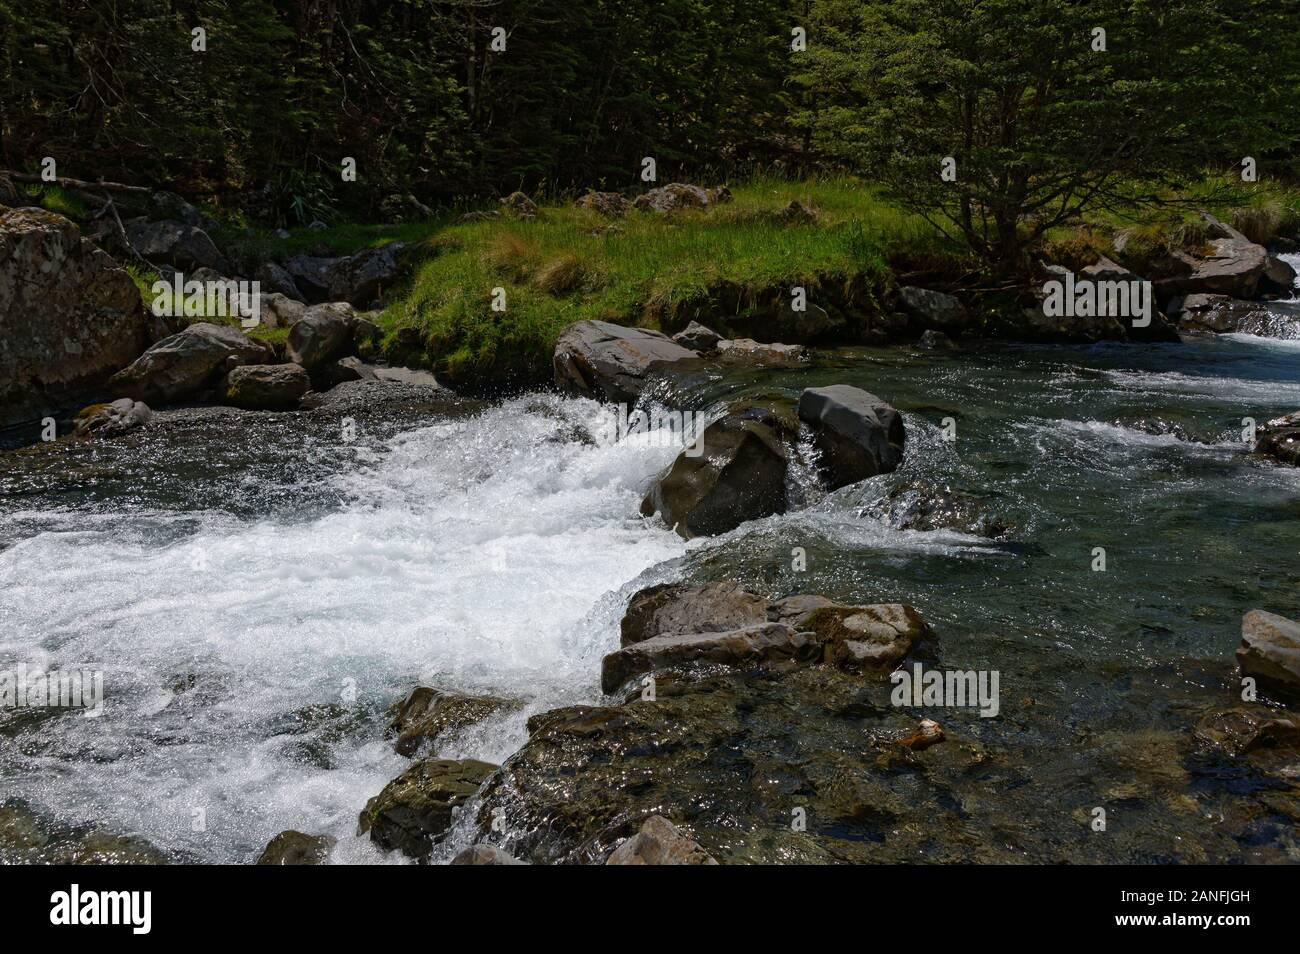 White water is formed by a river flowing over boulders. Stock Photo